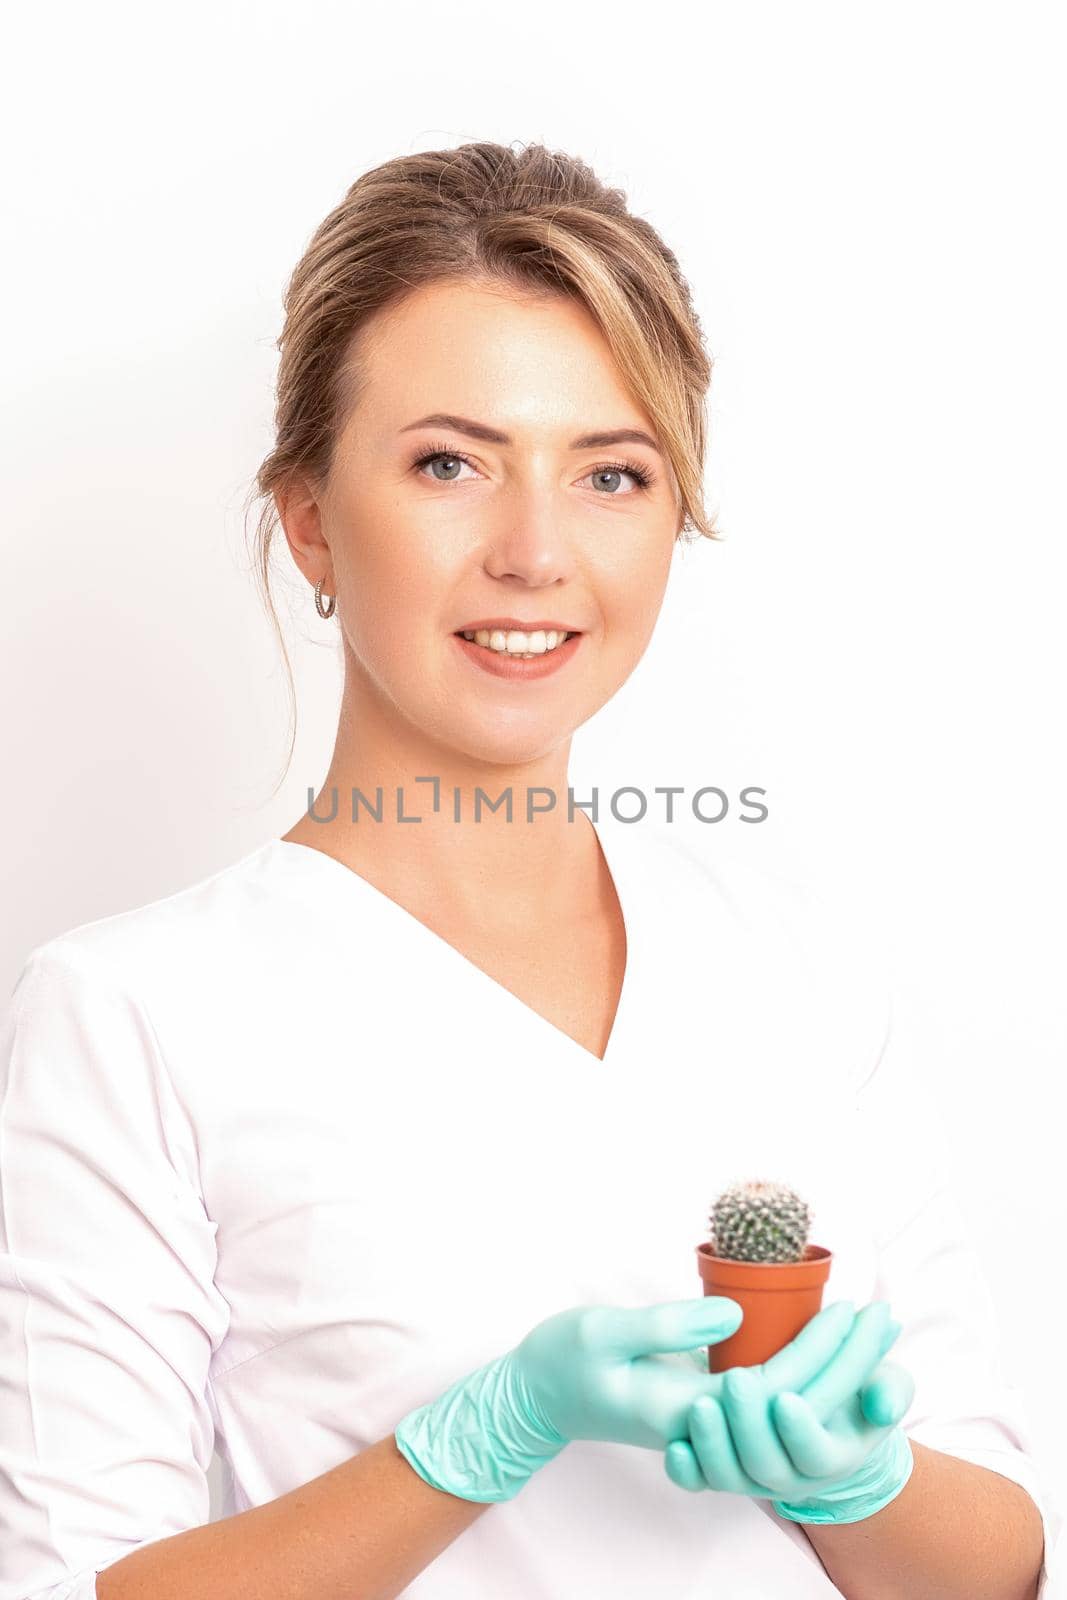 A portrait of a smiling female holds little green cactus in her hands. Hair removal concept